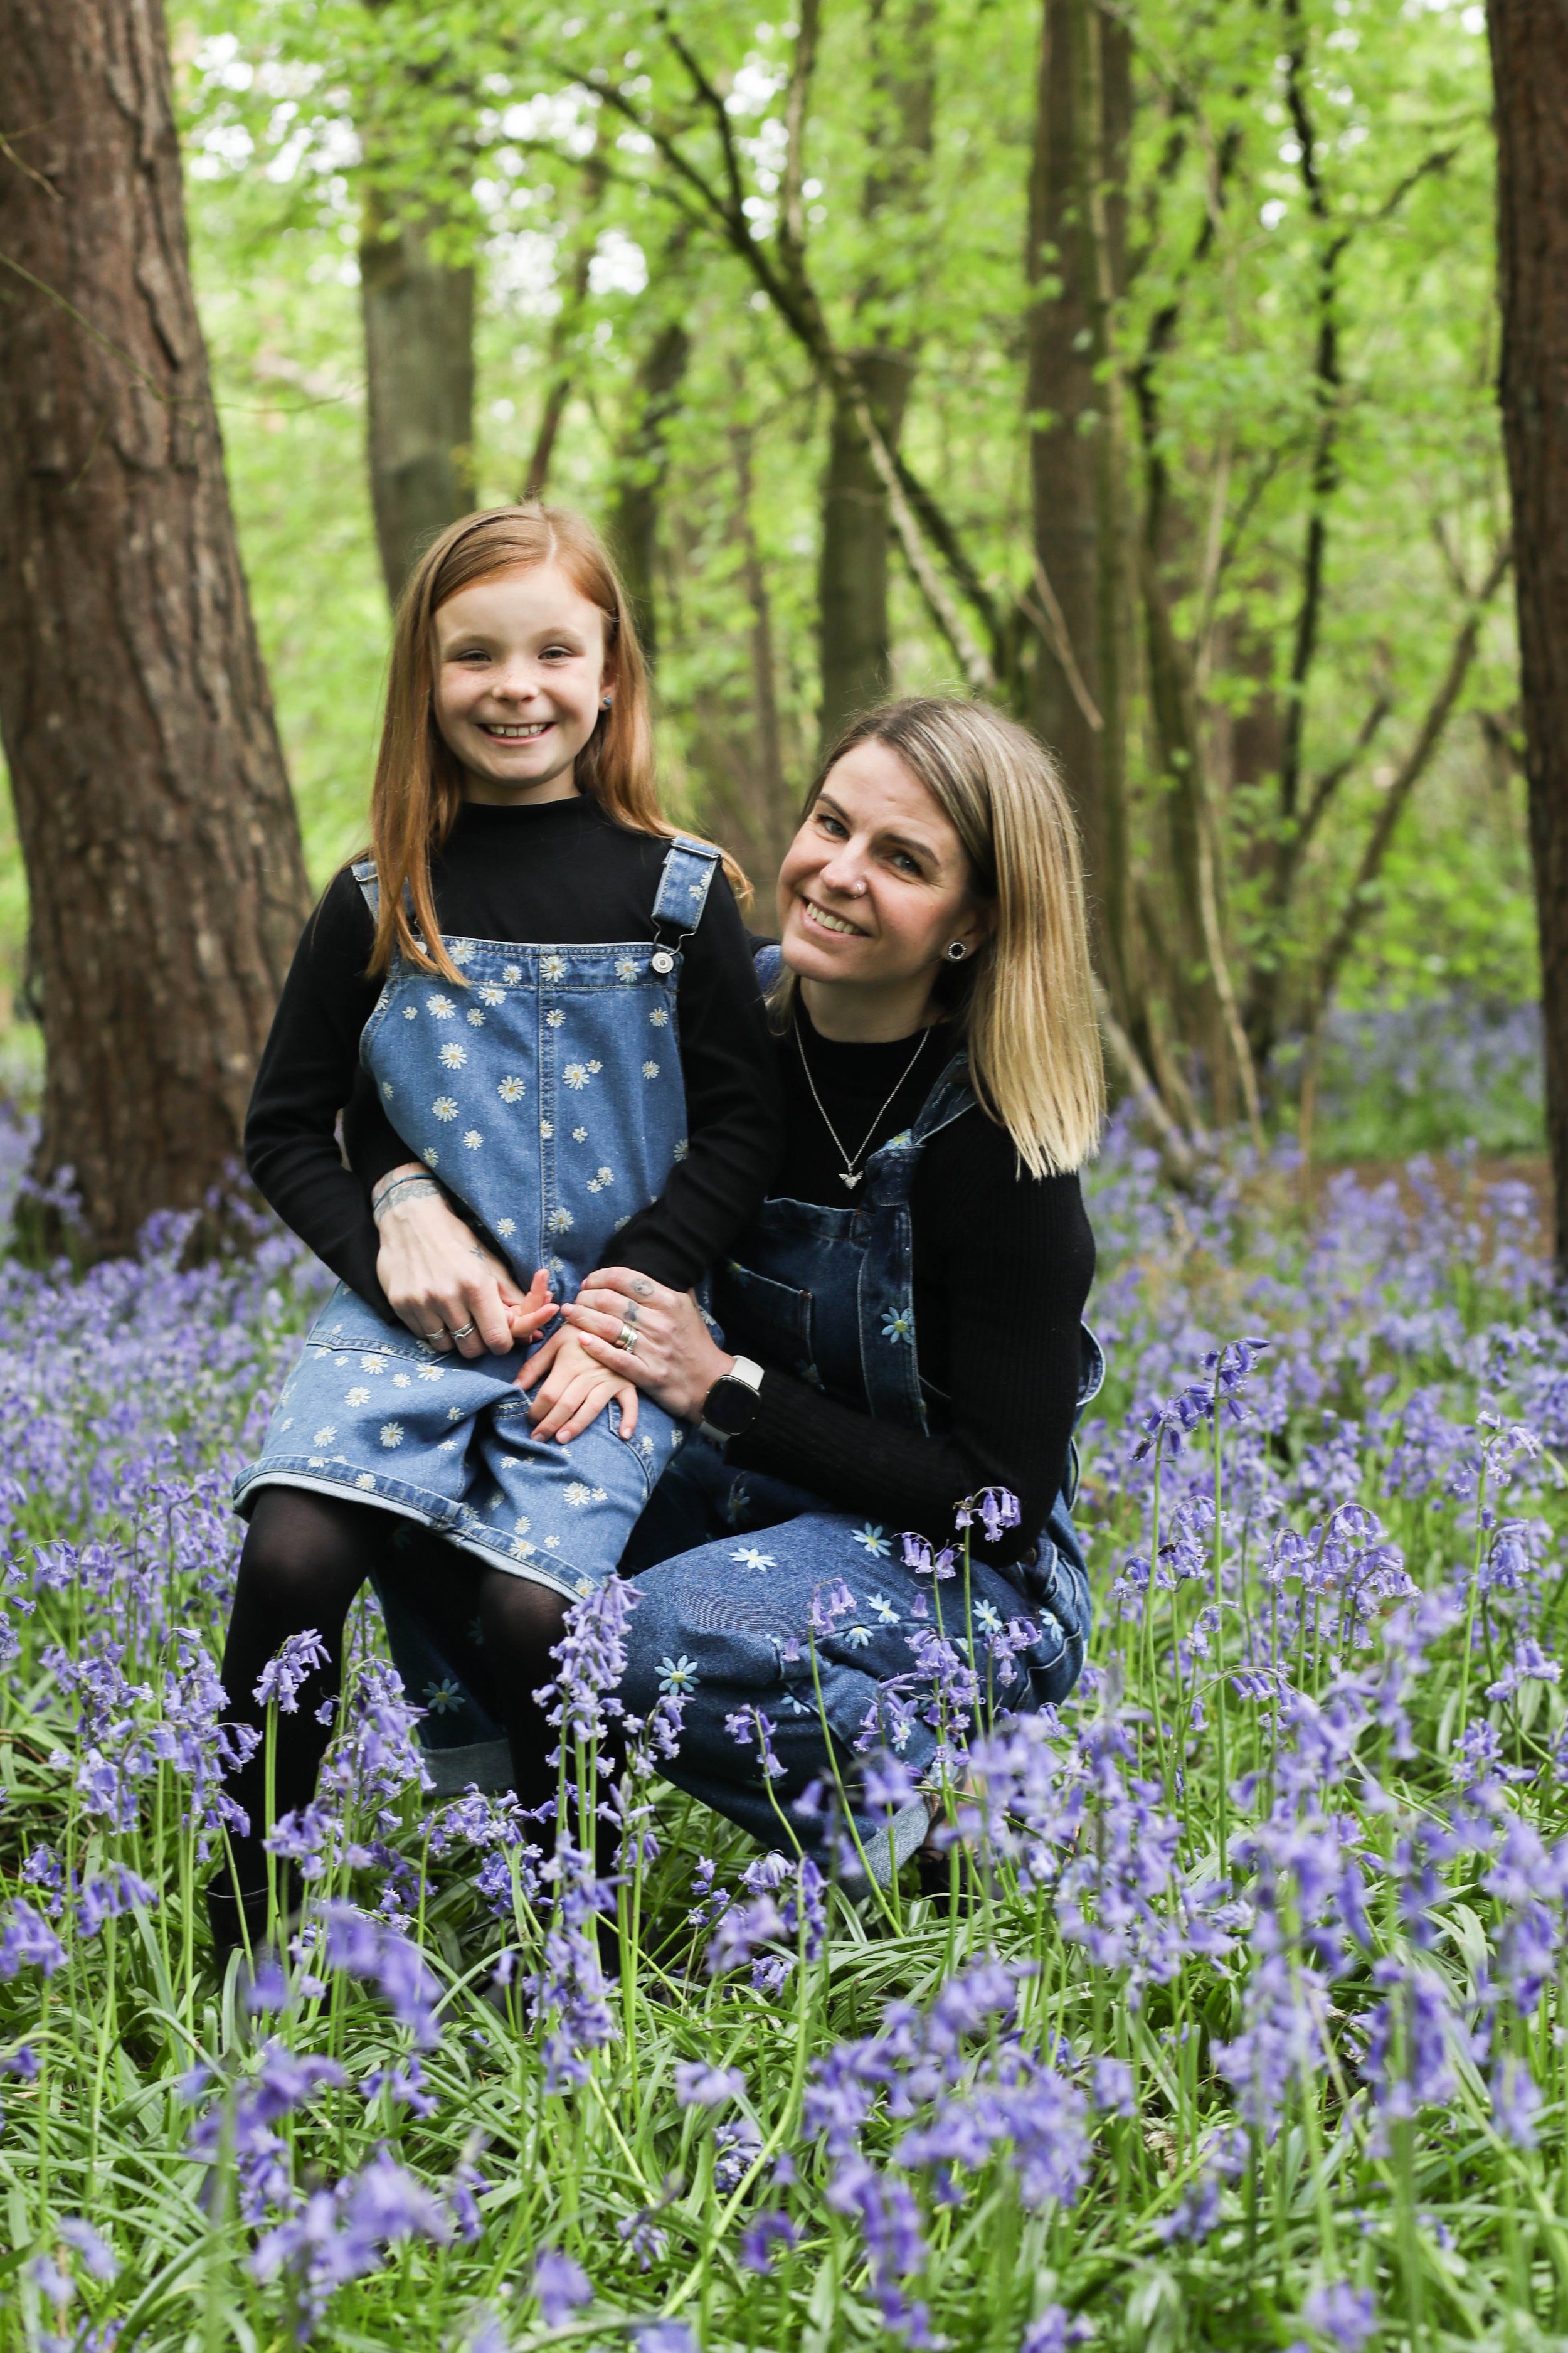 MUM AND DAUGHTER PHOTO SHOOT IN THE BLUEBELLS | BERKSHIRE PORTRAIT SHOOTS50 choice .JPG